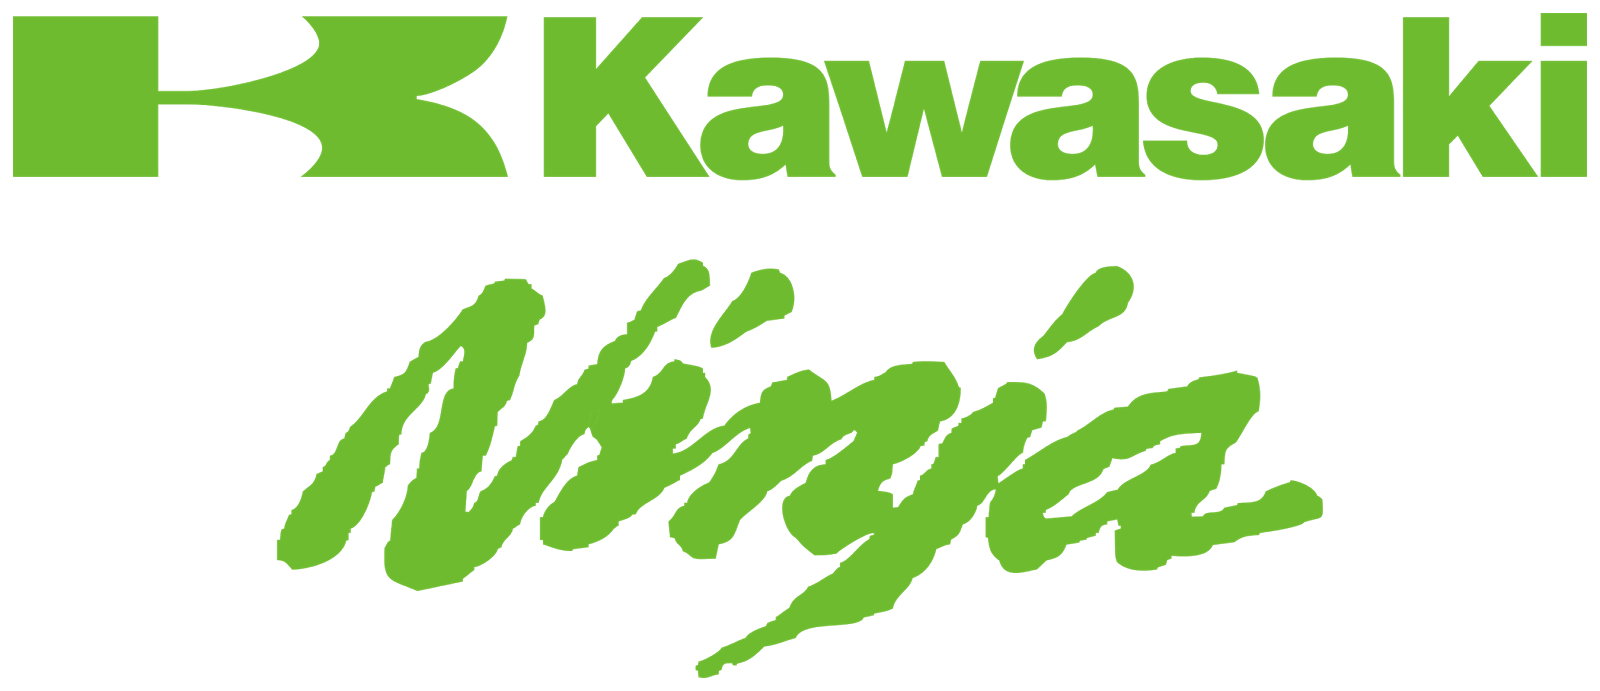 Kawasaki ZX 6R logos decals, stickers and graphics - MXG.ONE - Best moto  decals